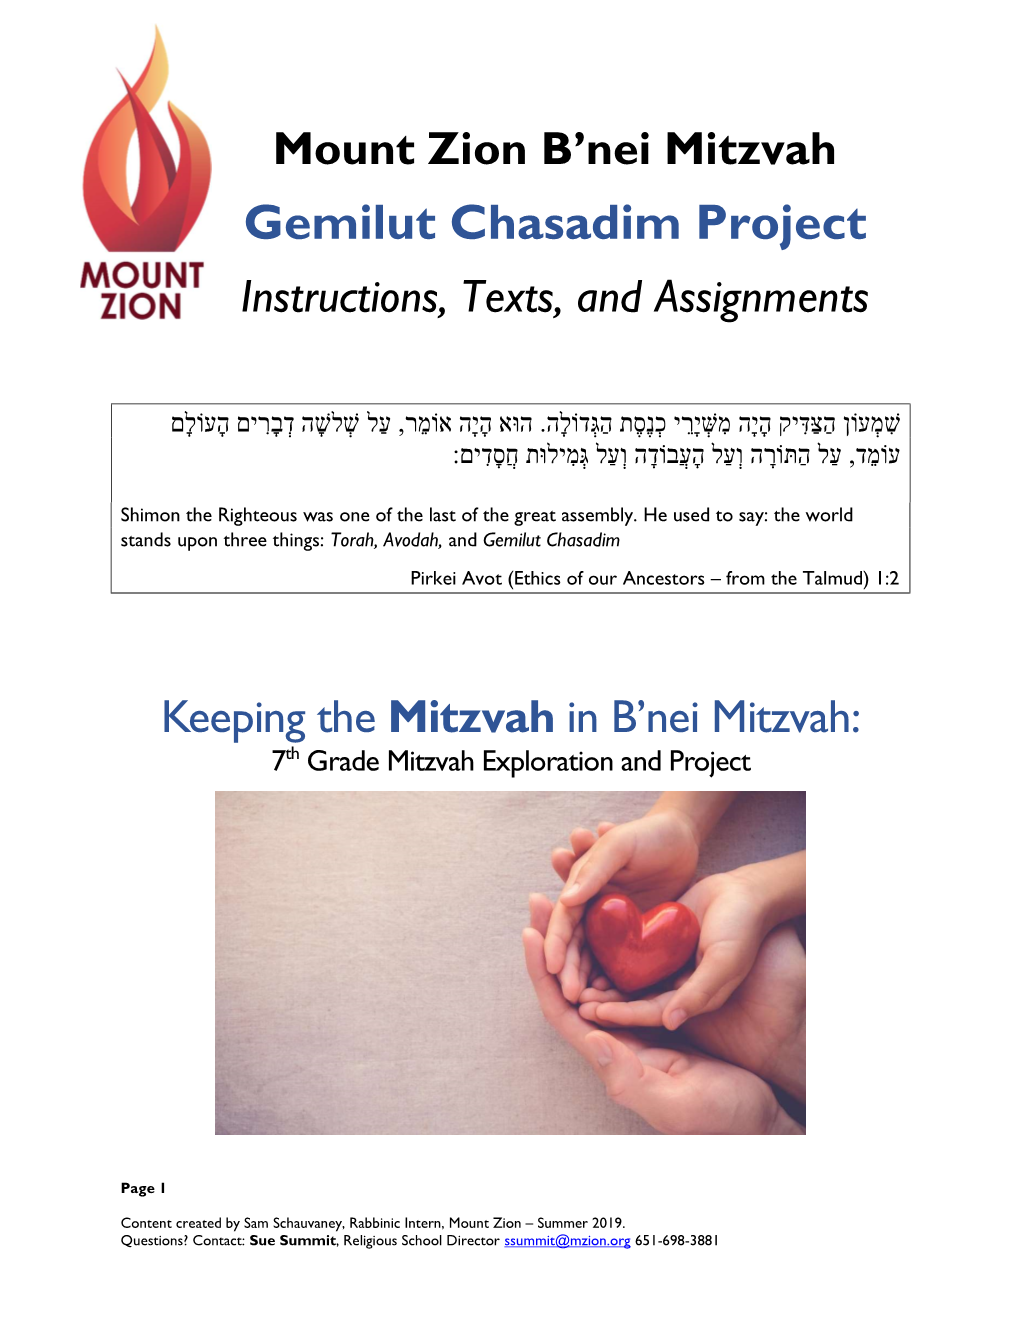 Gemilut Chasadim Project Instructions, Texts, and Assignments